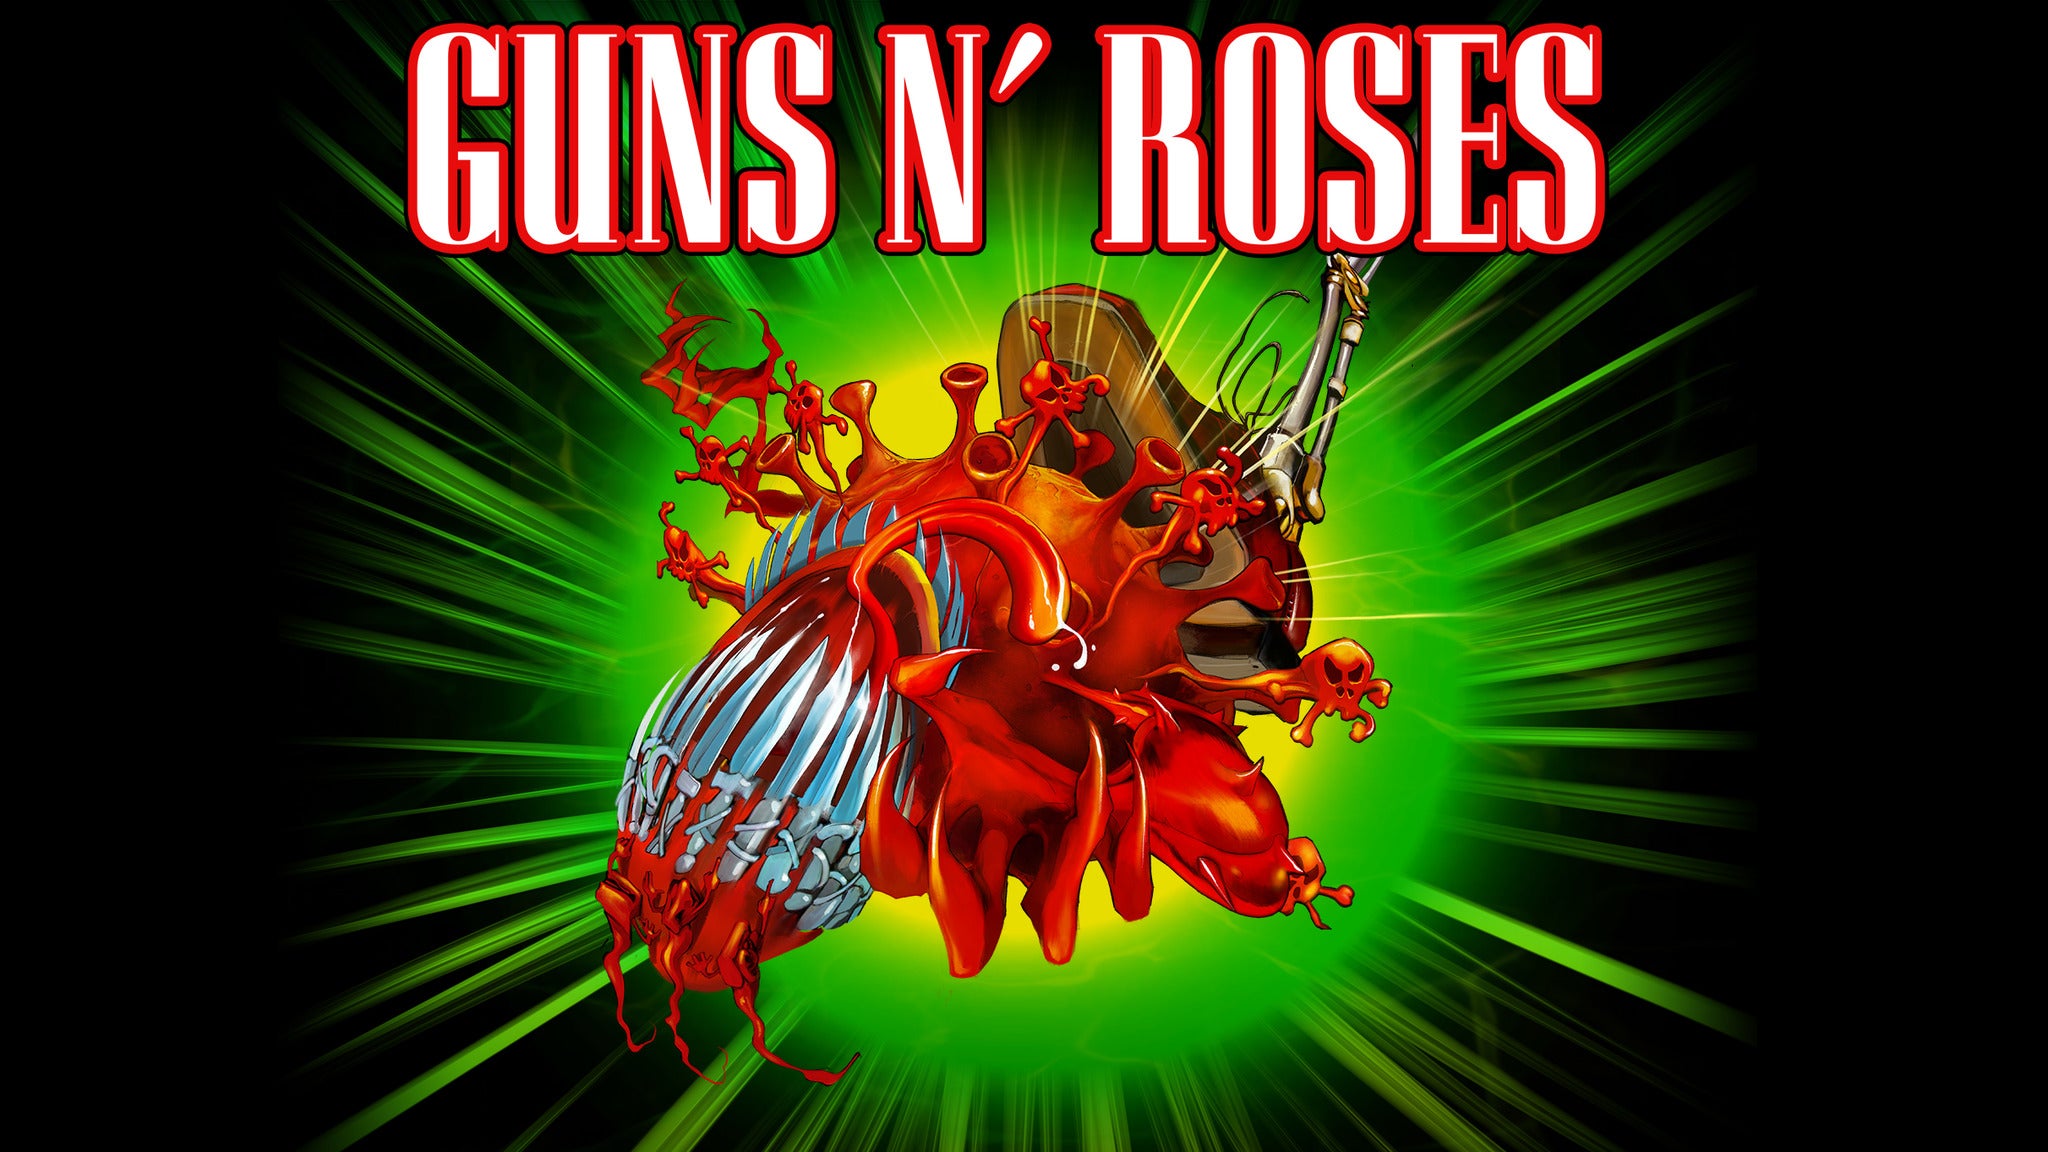 Guns N' Roses presale password for early tickets in Atlantic City